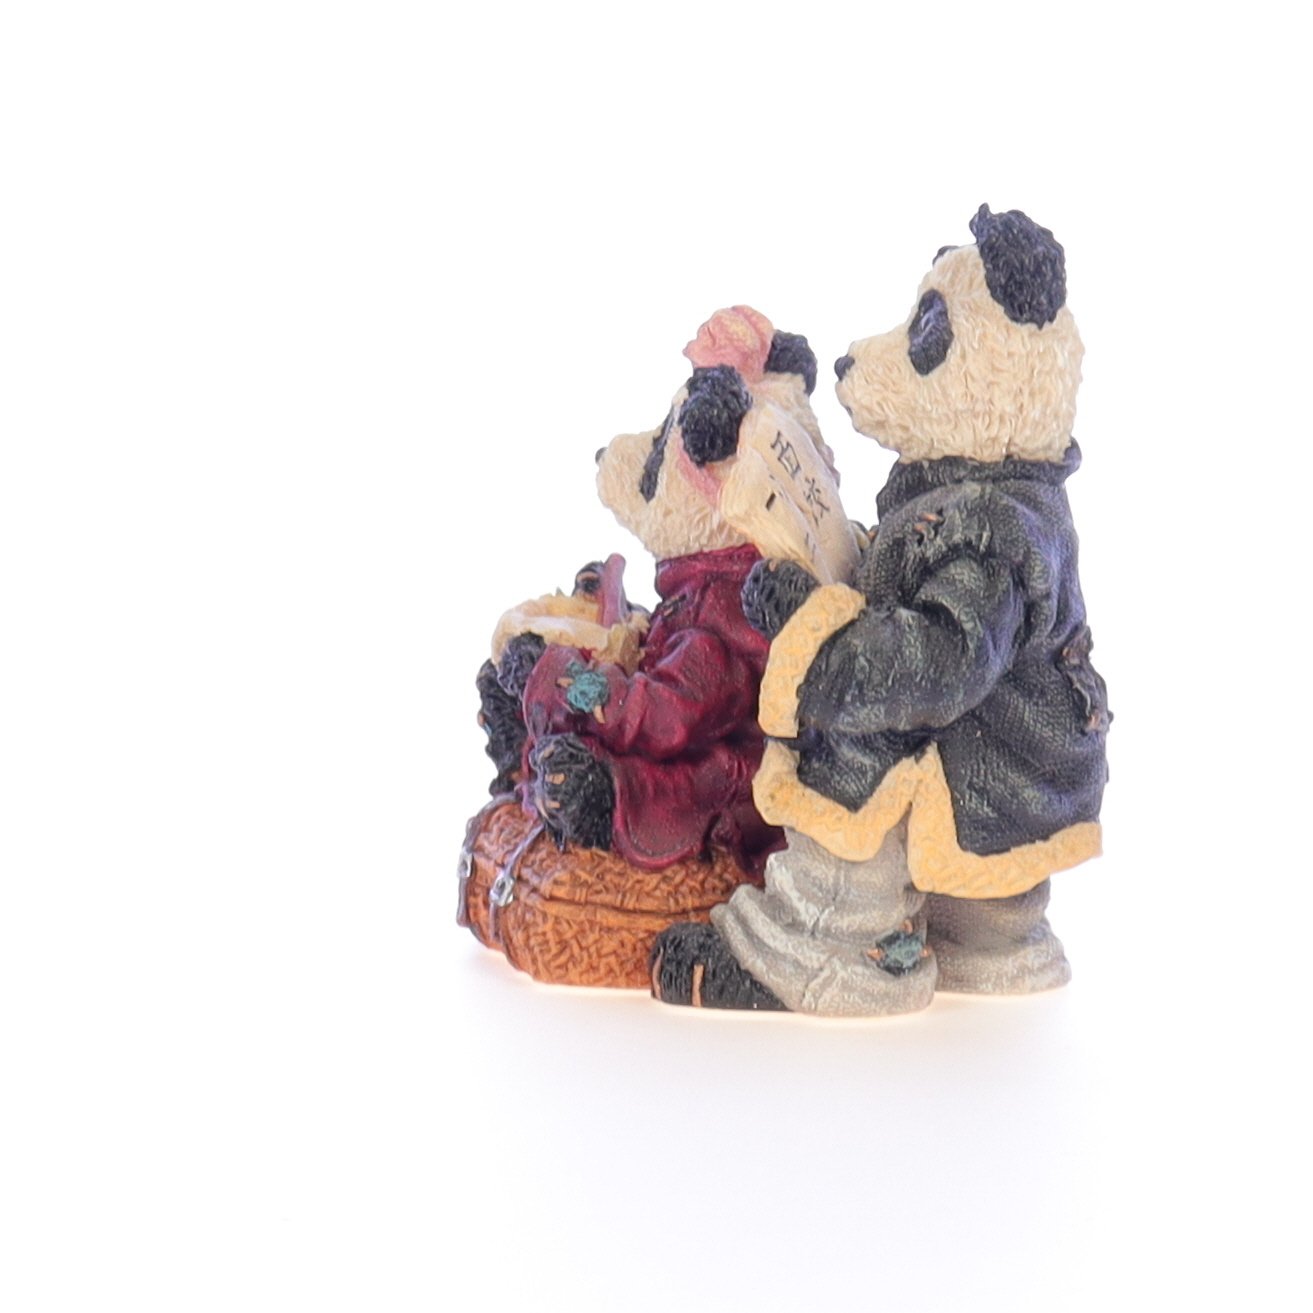 Boyds_Bears_Bearstone_Resin_Figurine_Hsing_Hsing_and_Ling_Ling_Wongbruin_Carryout_2433_03